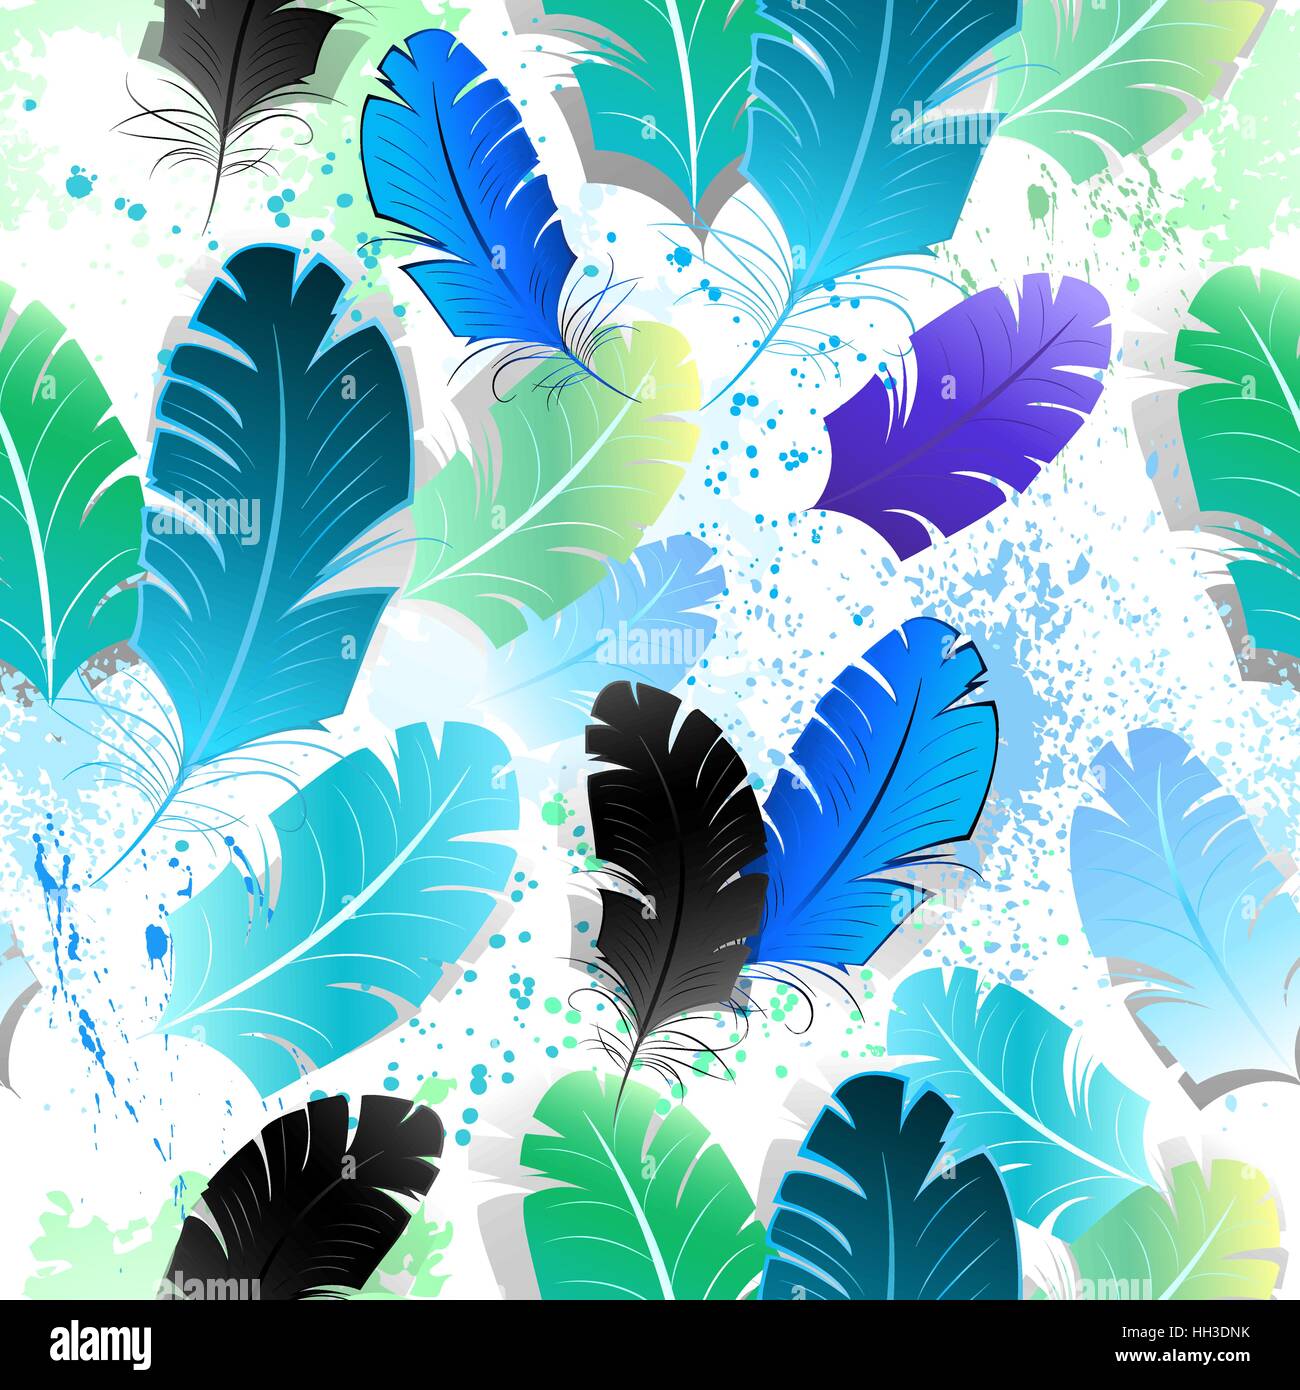 seamless pattern with bright blue, green and black feathers on a white background, shaded paint spots. Stock Vector